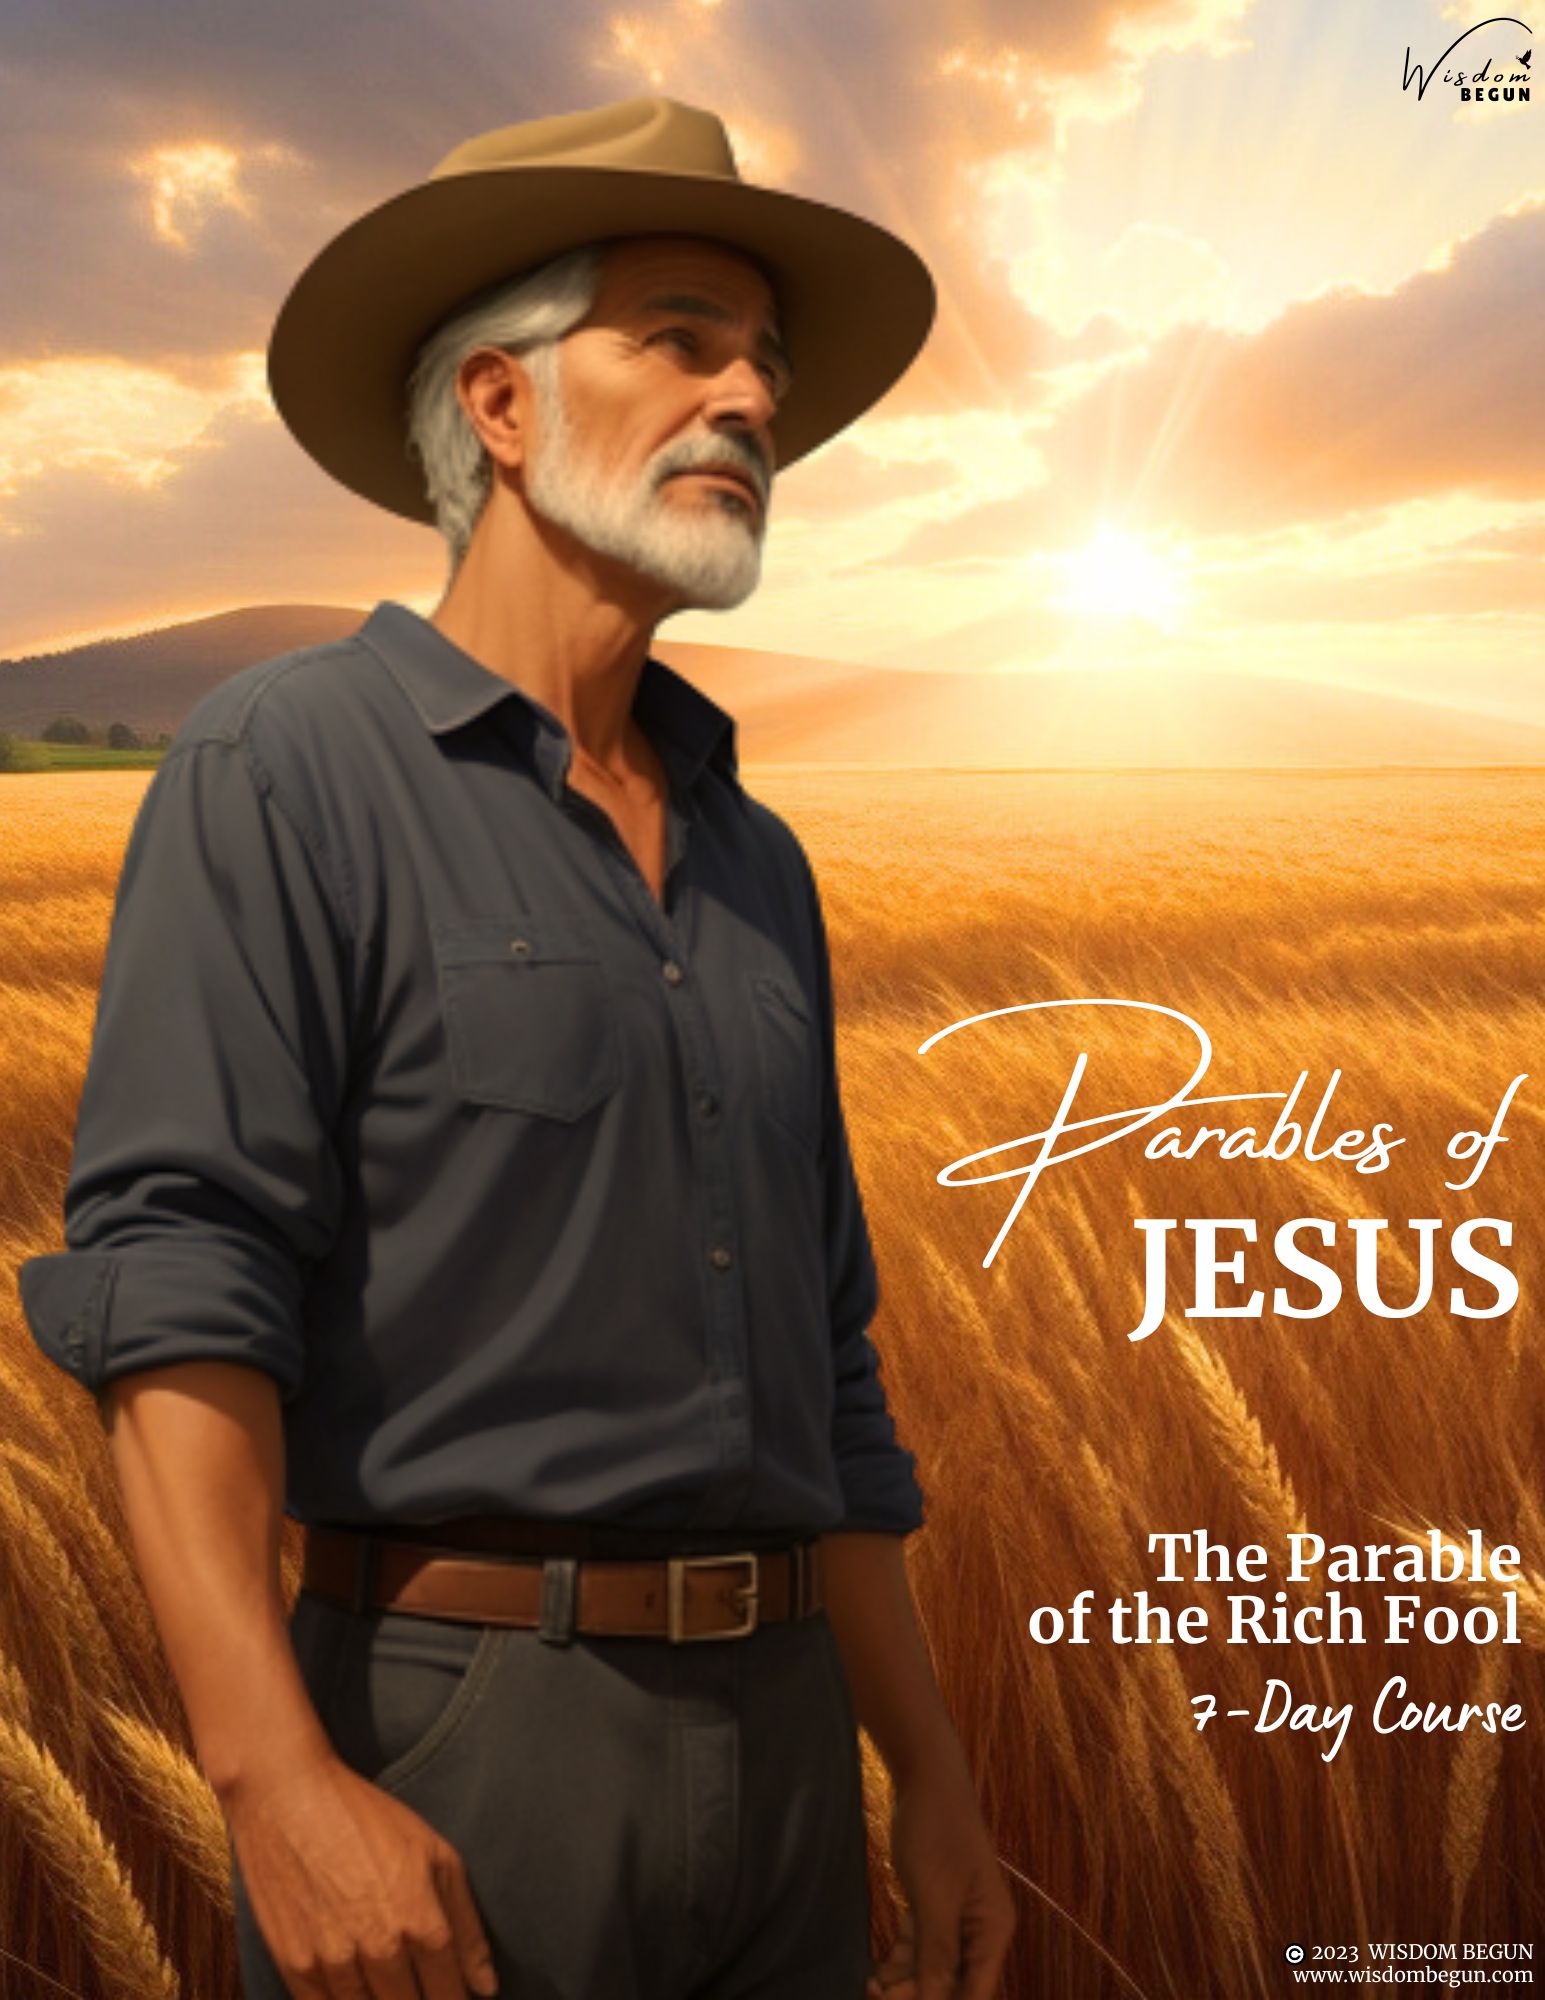 Parables of Jesus 7-Day Course: The Rich Fool